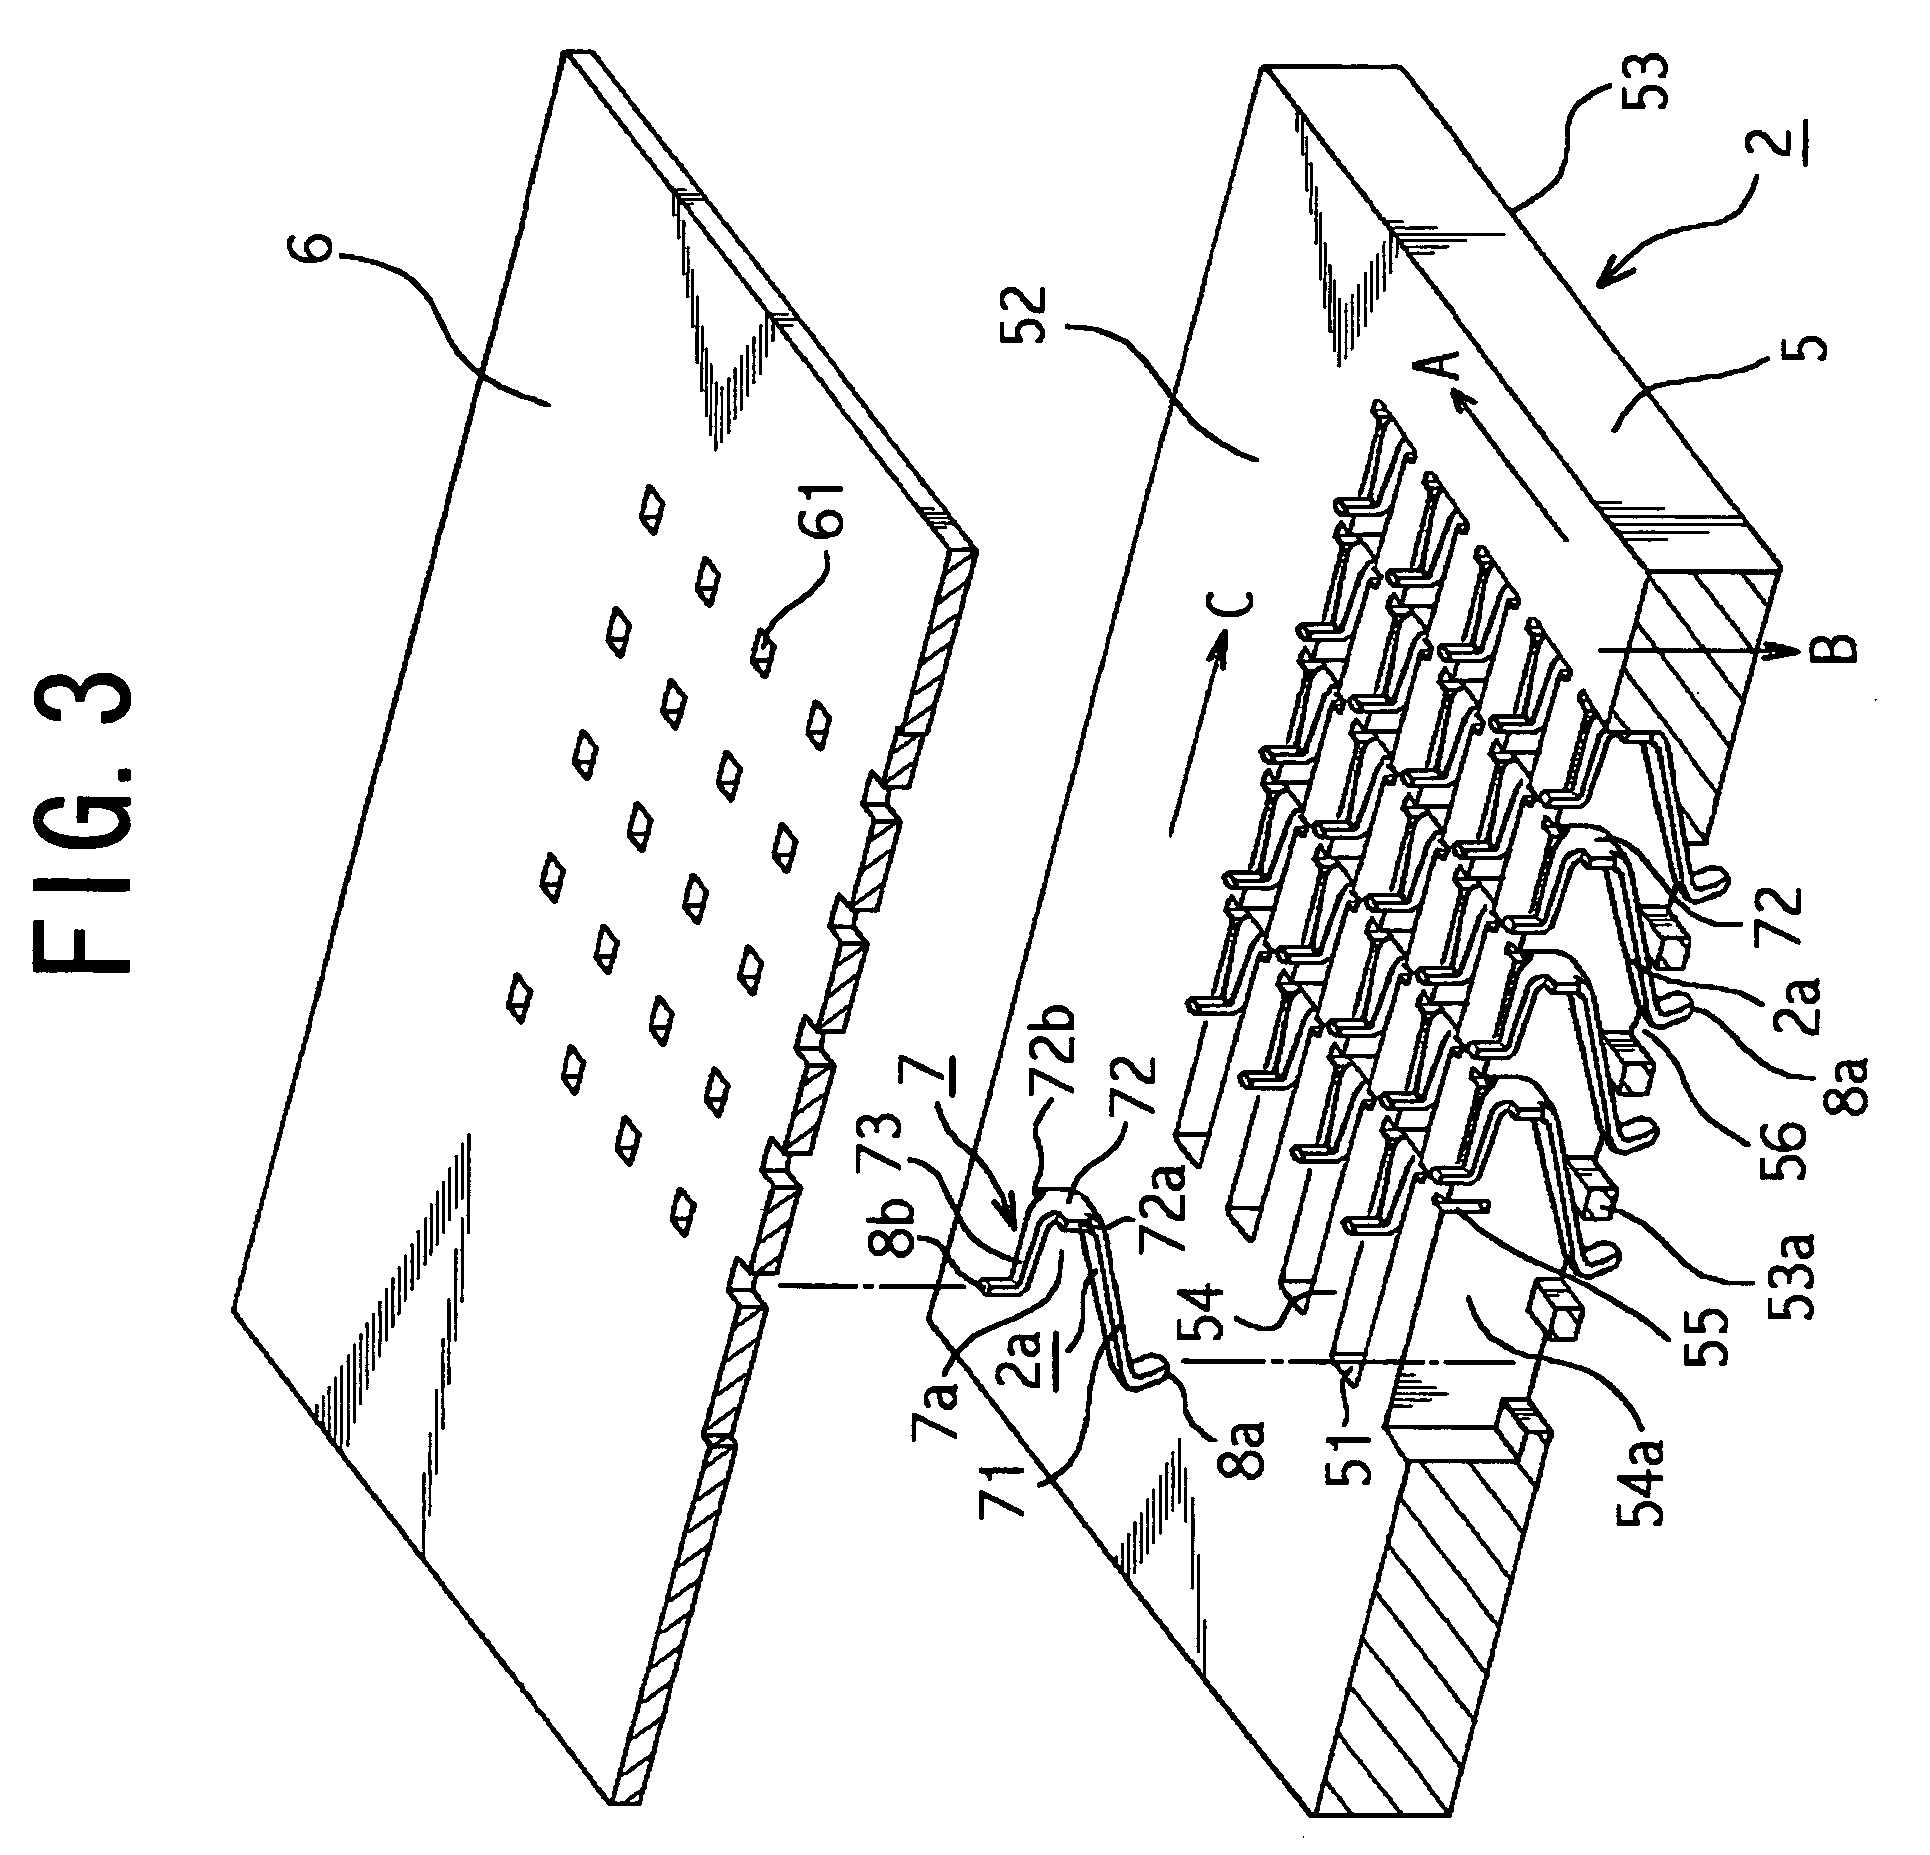 Socket for electronic part